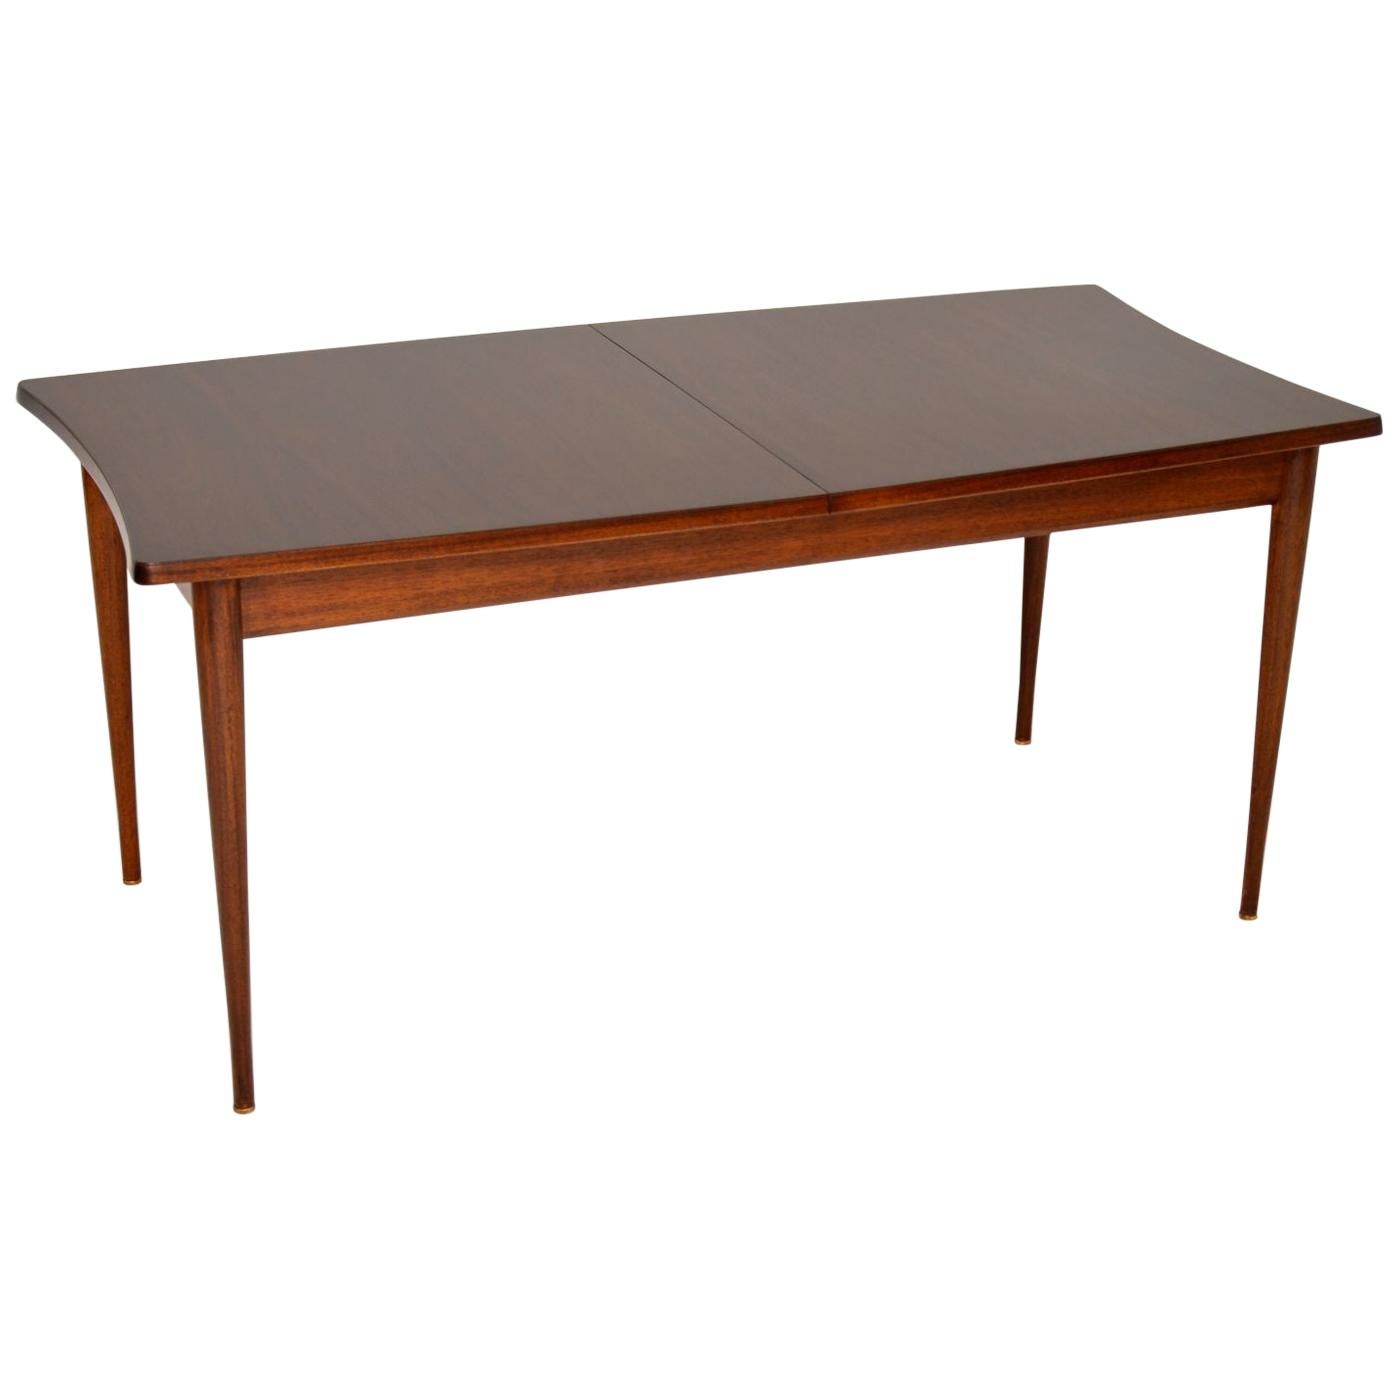 1960s Vintage Extending Dining Table by Uniflex